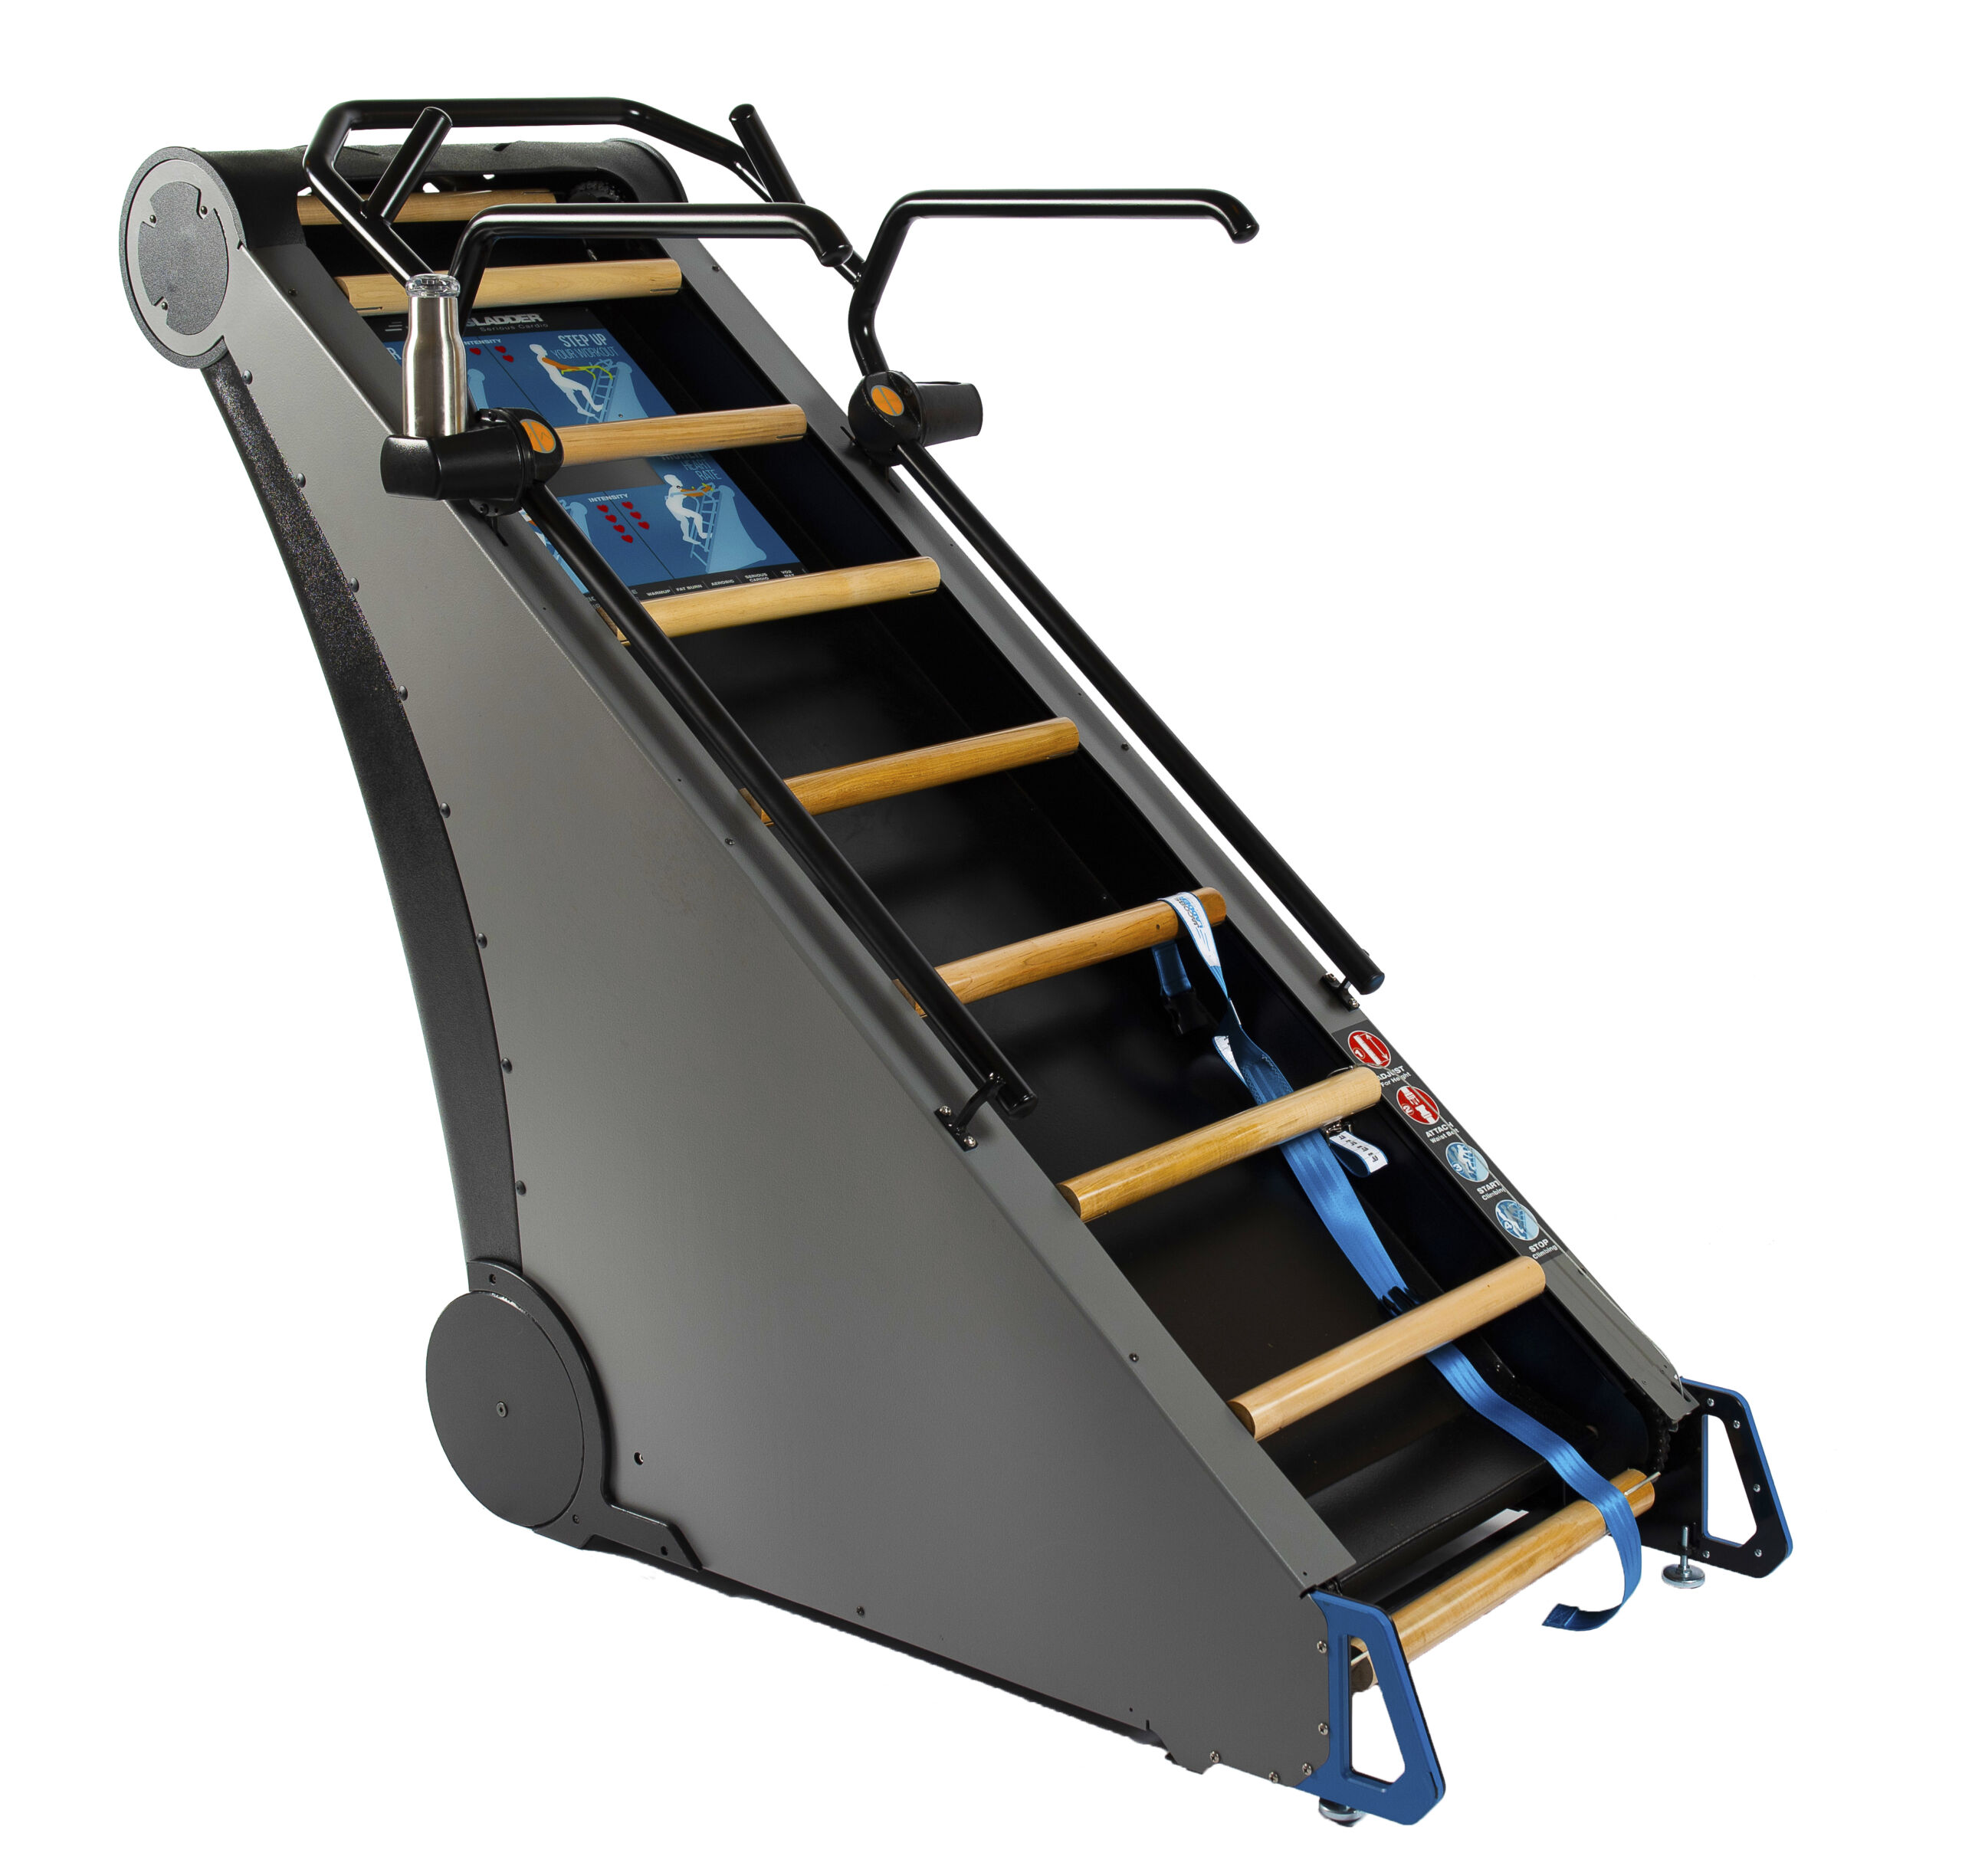 StairMaster Jacobs Ladder JLX 1 Product Image